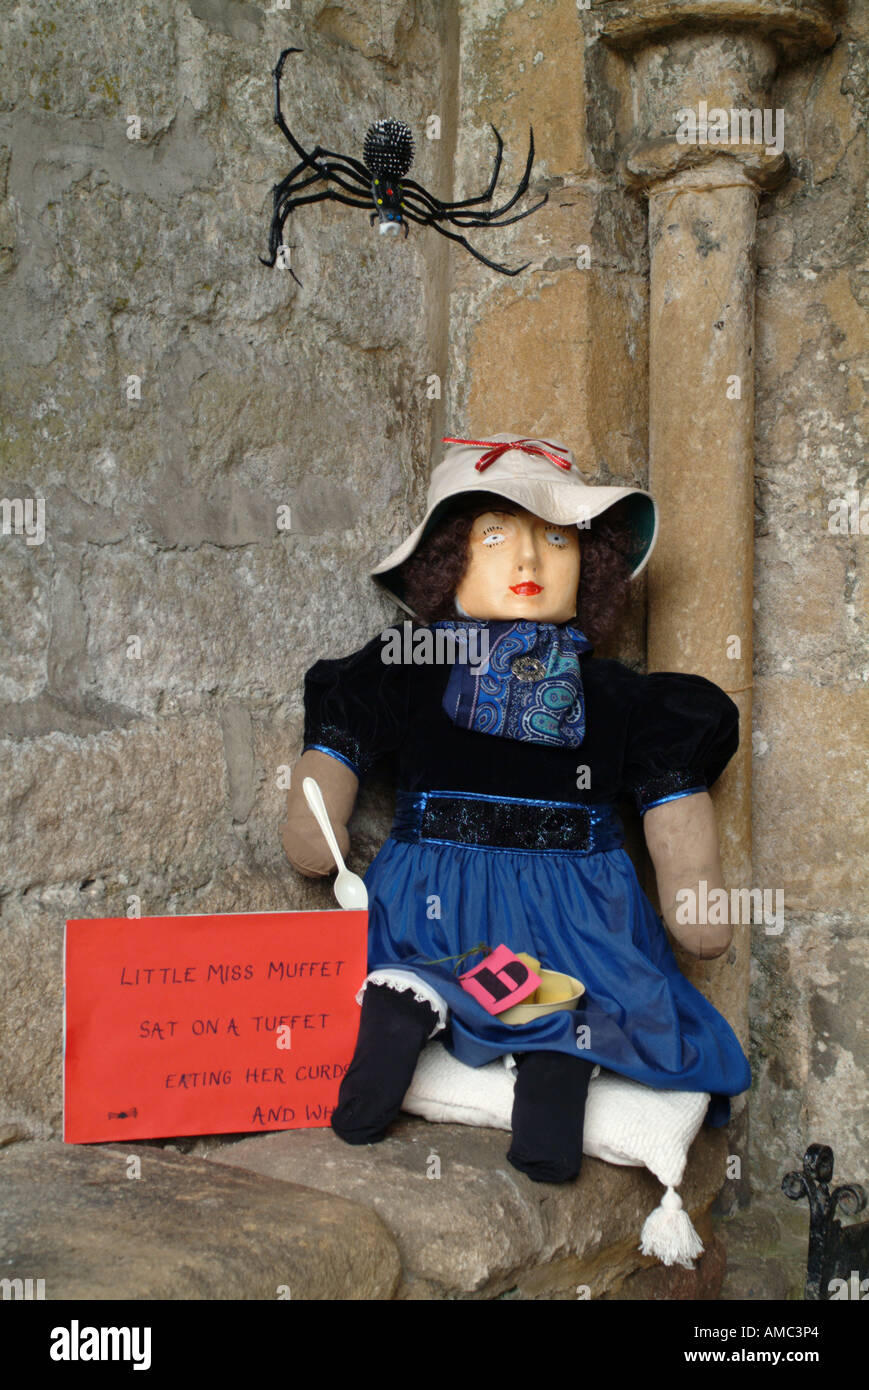 Little Miss Muffet in the Scarecrow Trail at Romaldkirk Fair, County Durham, England, UK. Stock Photo